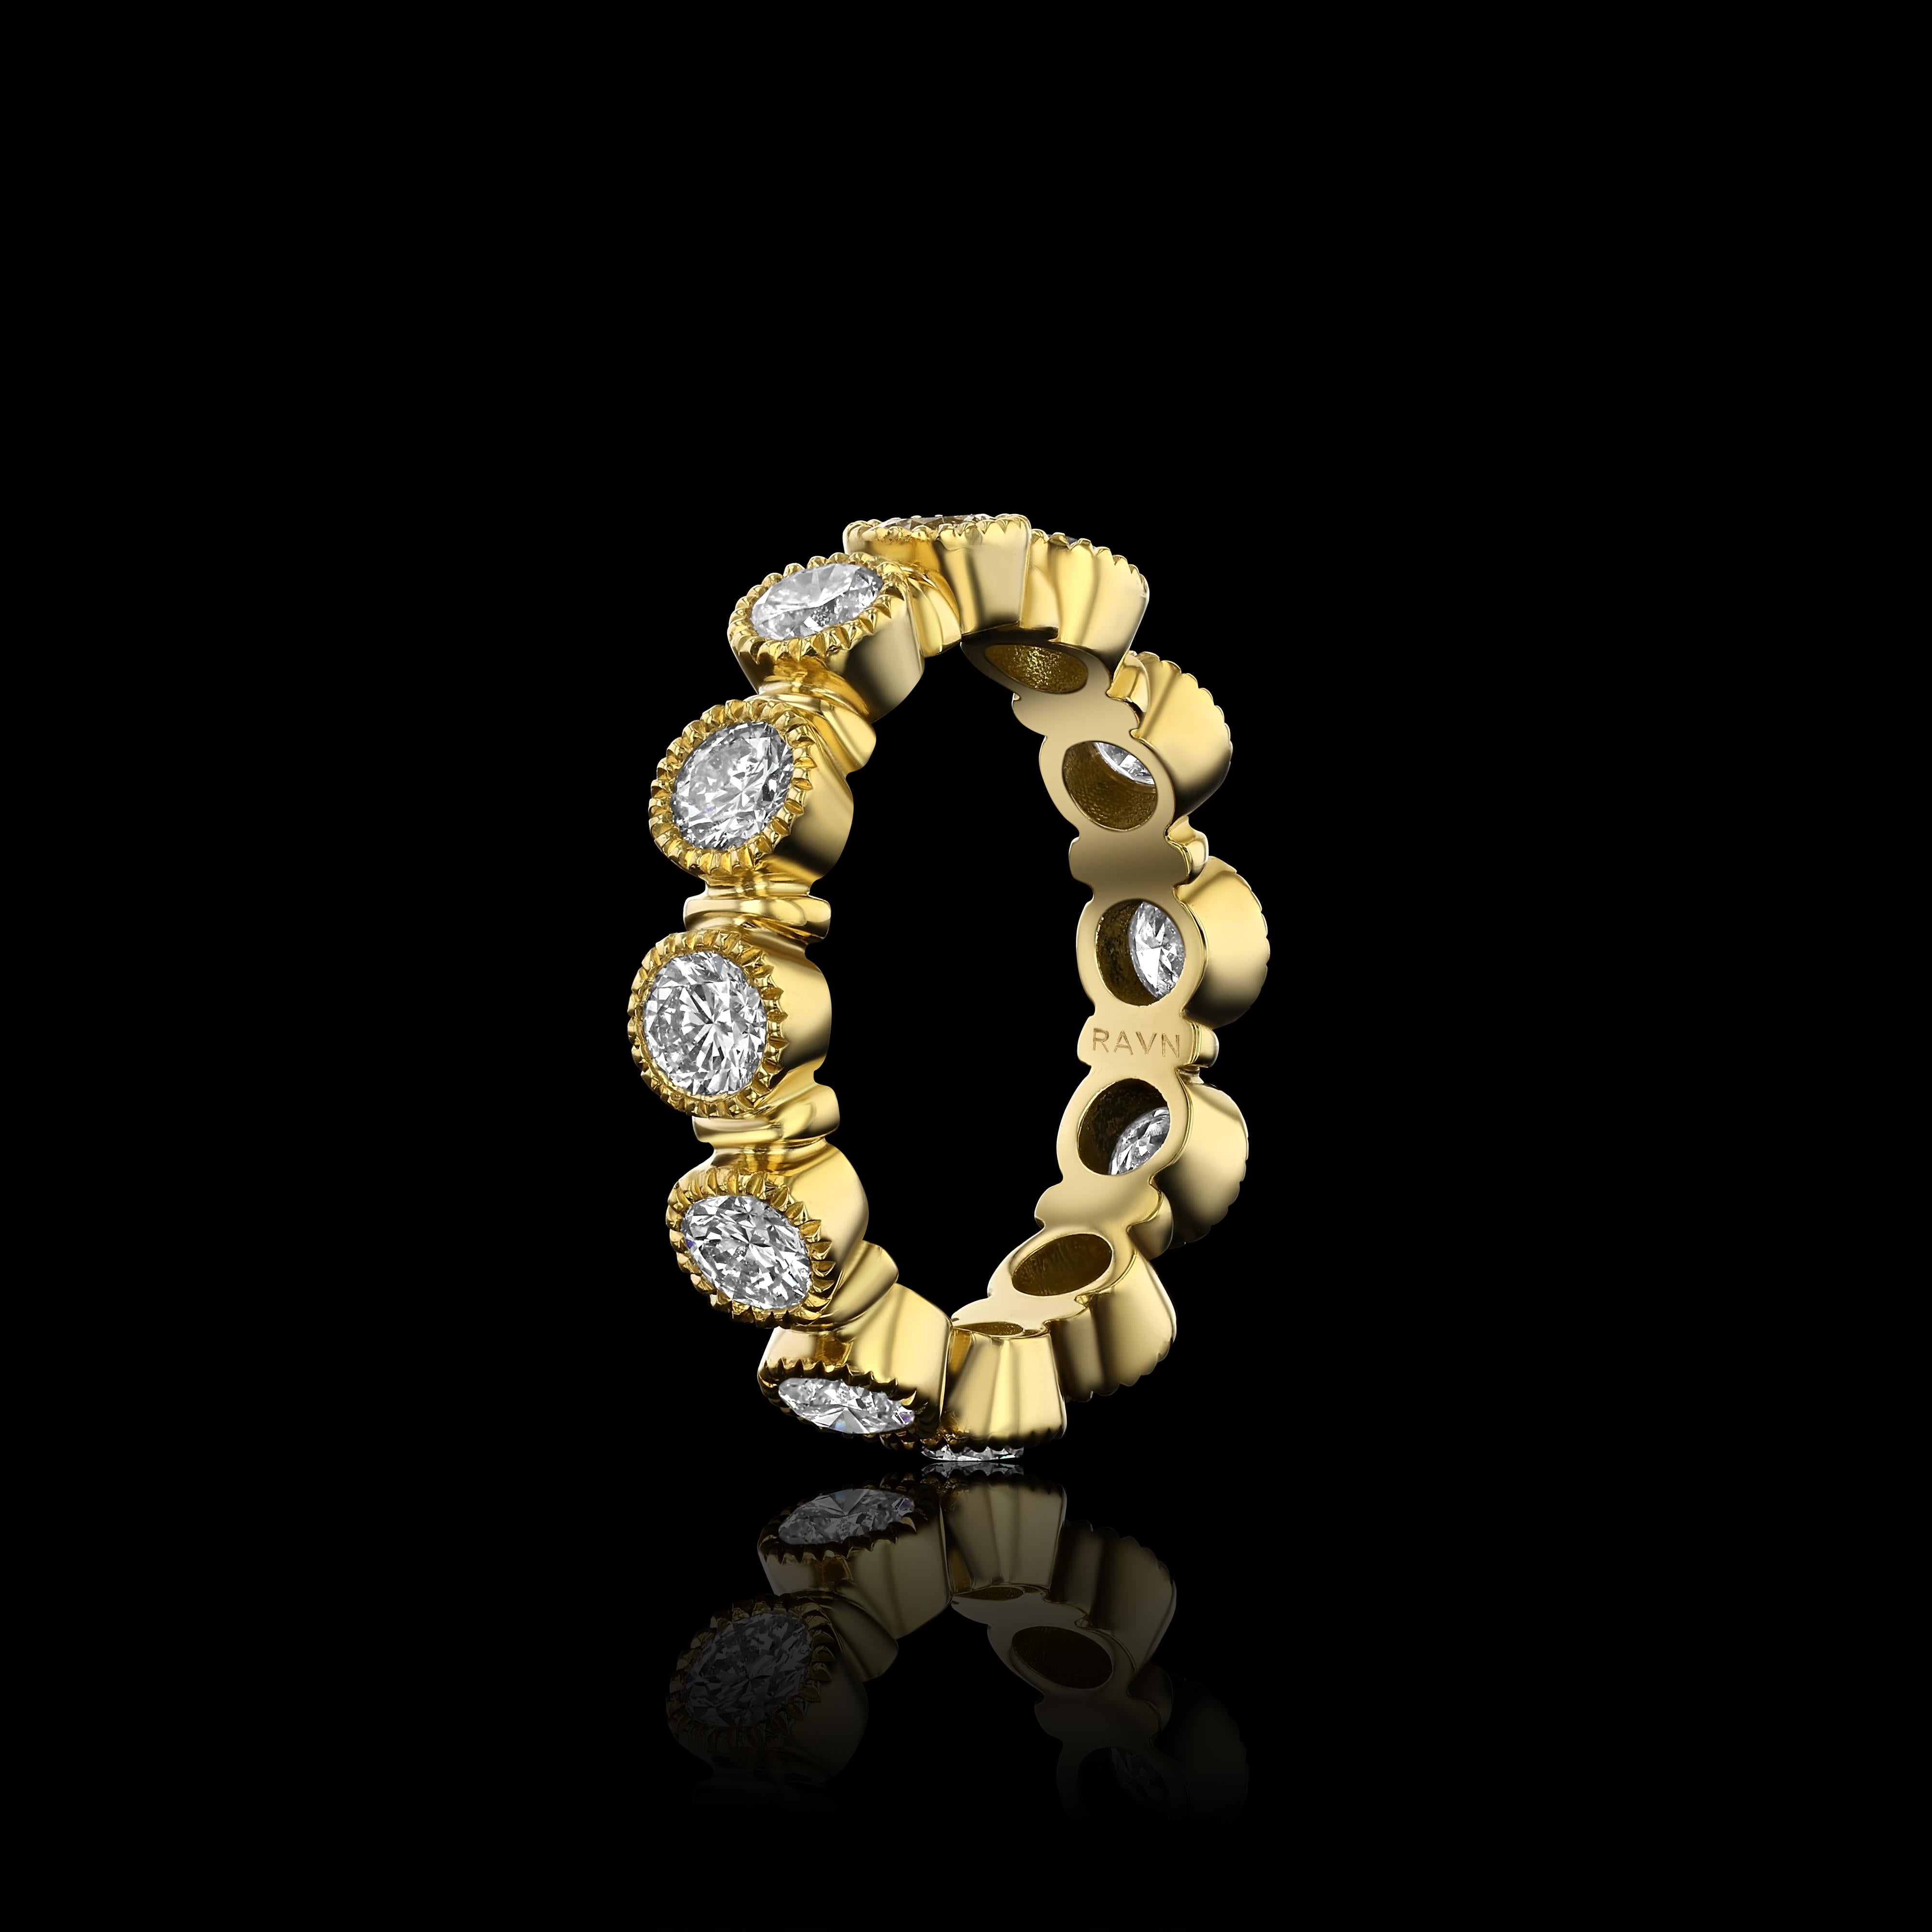 For Sale:  House of RAVN, 18k Gold, Old World Arpeggio Eternity Ring with 12 Diamonds, 2ct 3